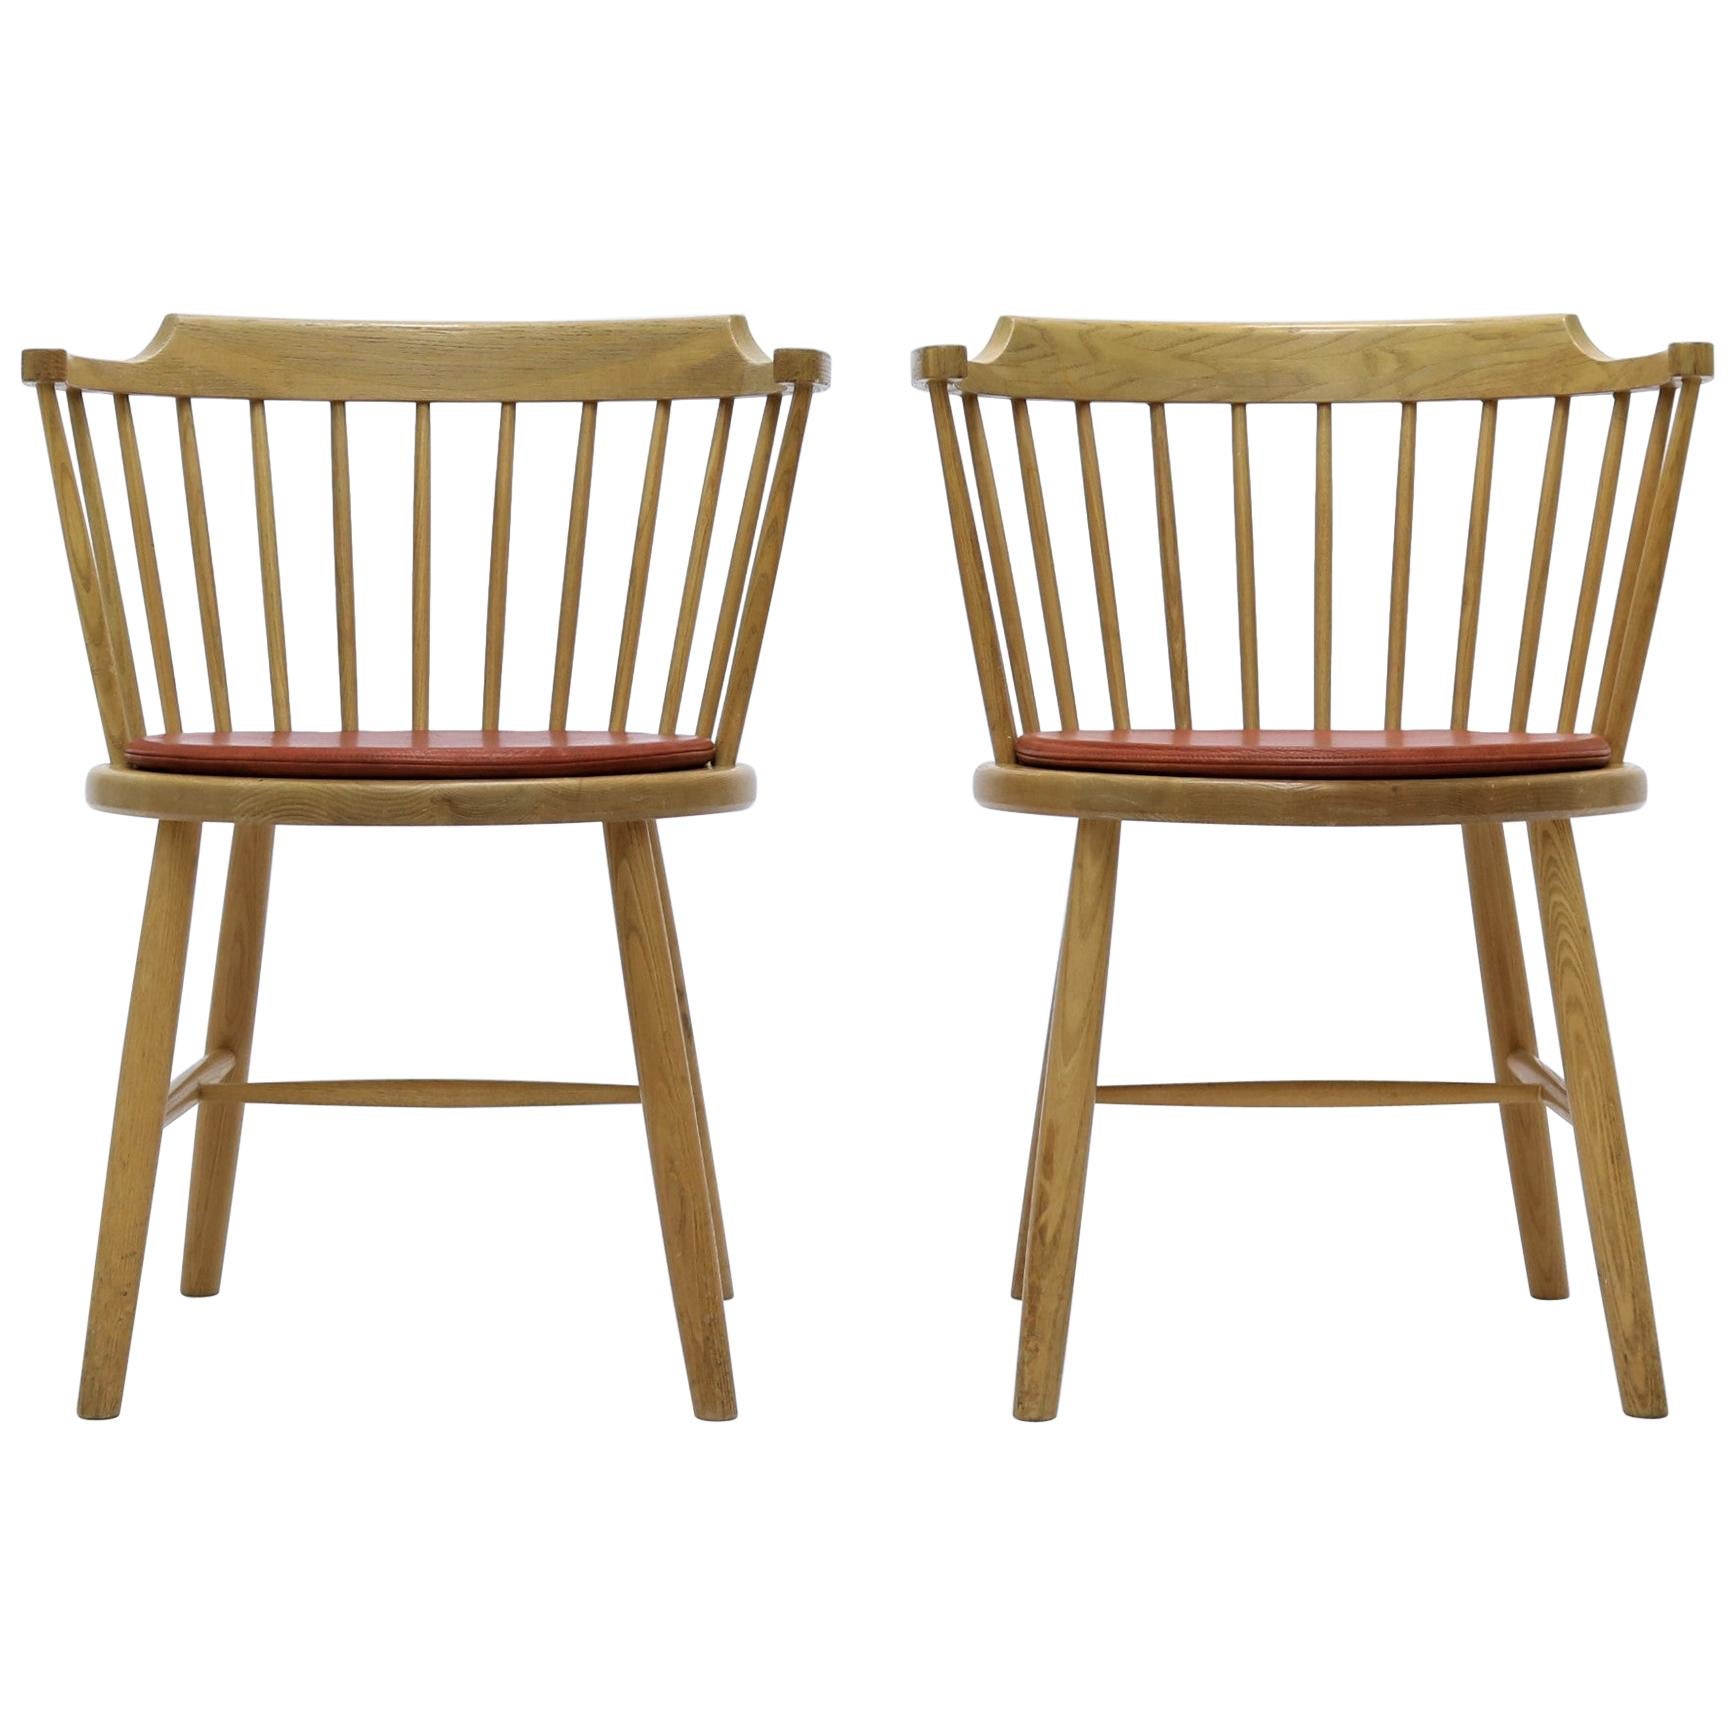 Borge Mogensen Pair of Danish Modern Armchairs in Oak and Leather